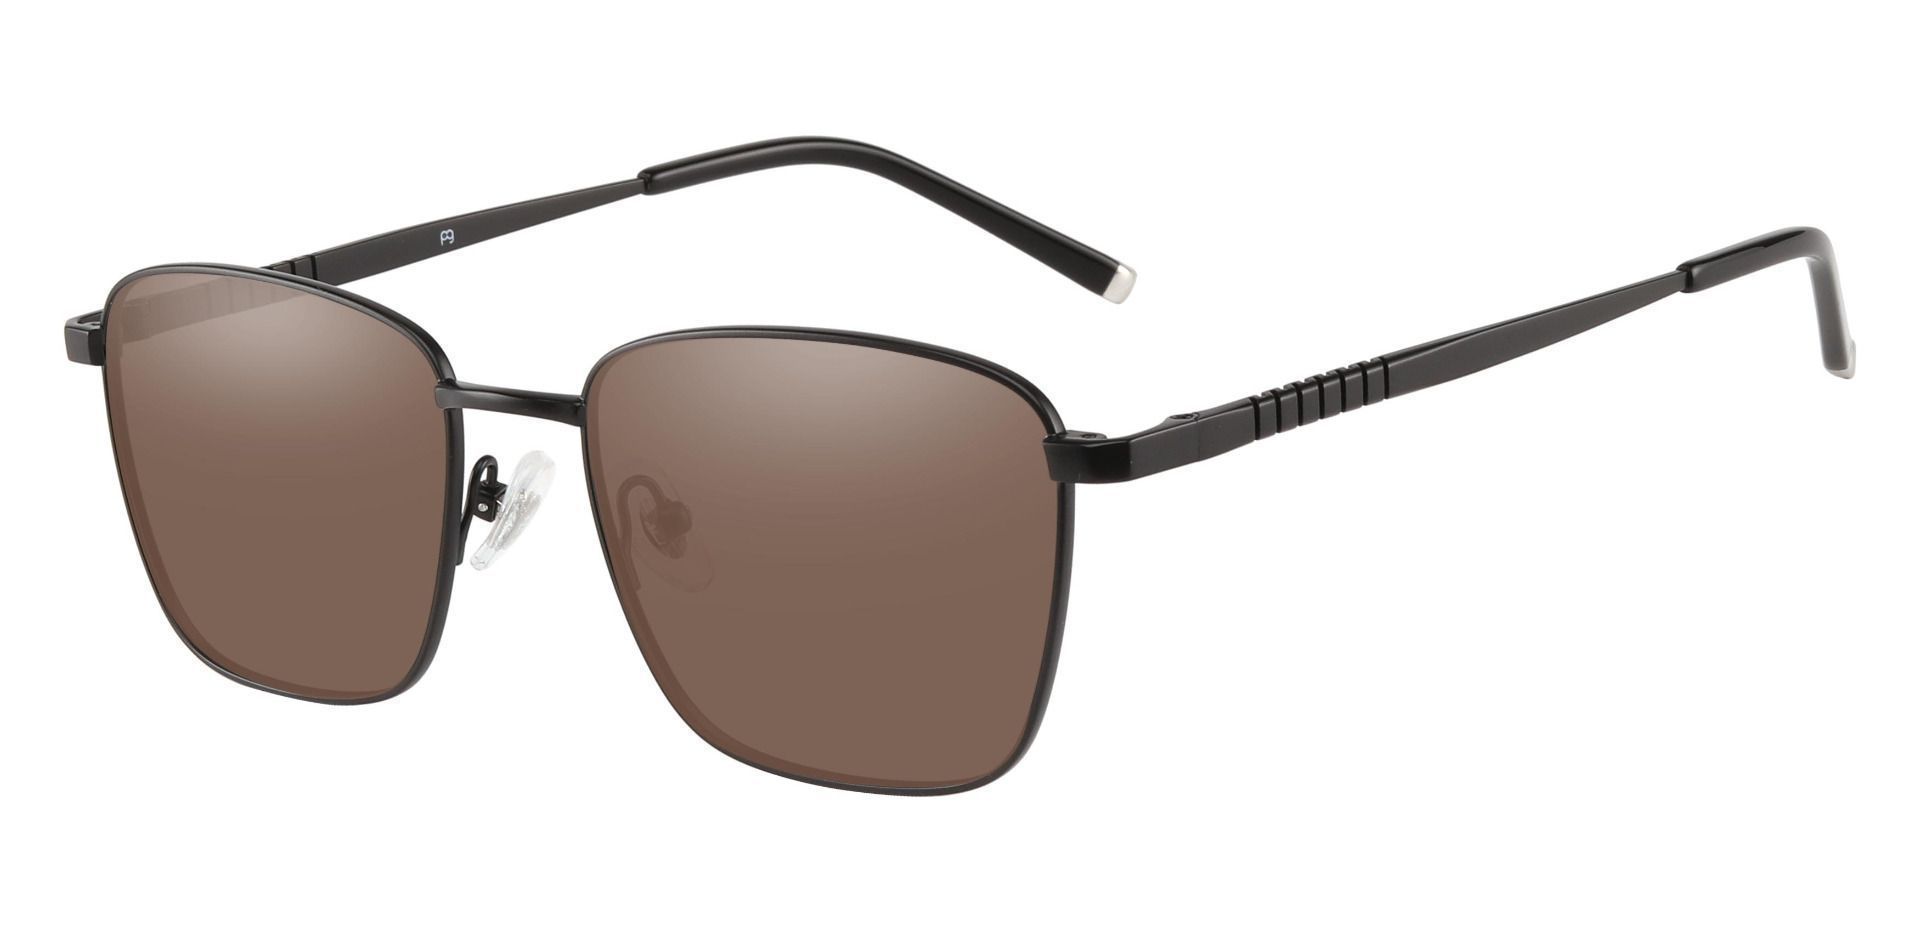 May Square Non-Rx Sunglasses - Black Frame With Brown Lenses